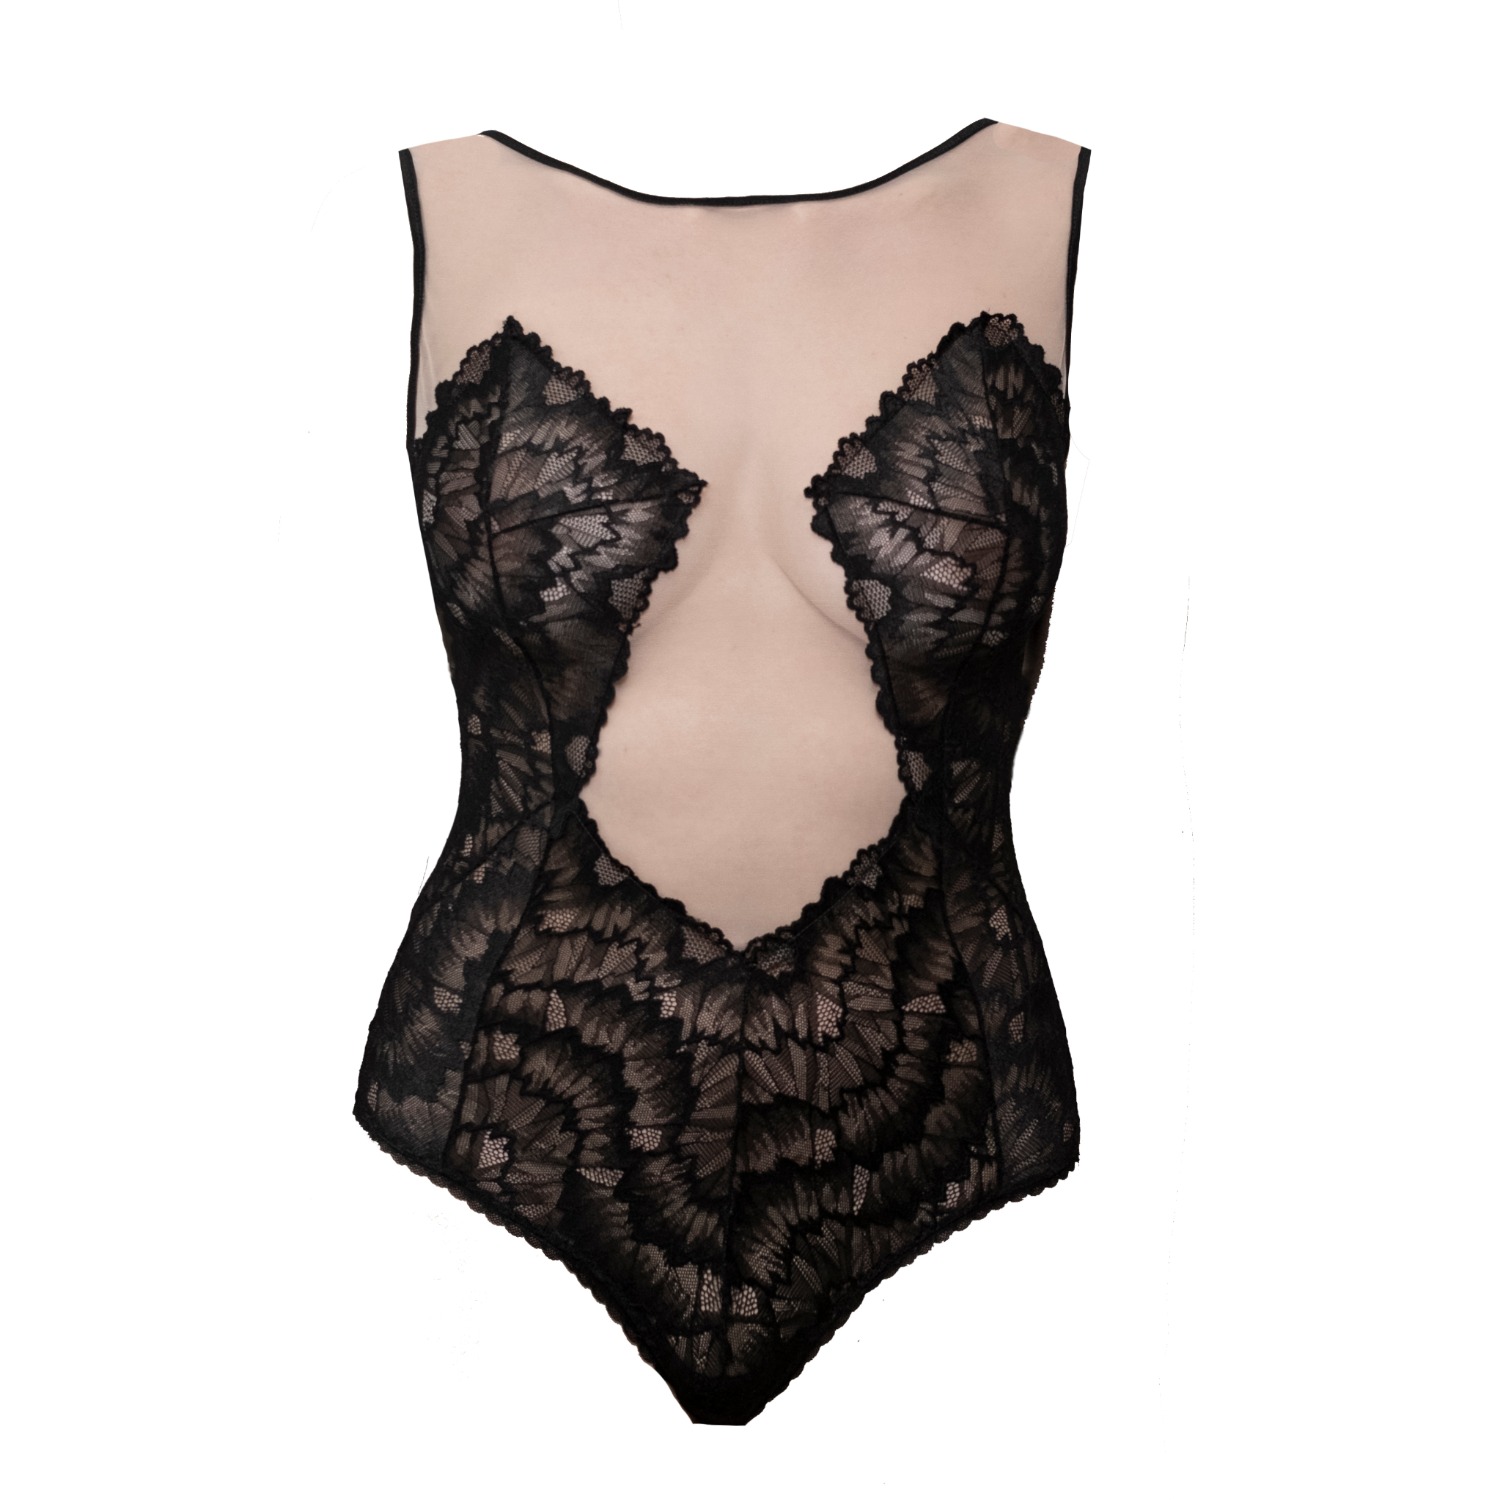 Mind Games Lace & Check Tulle Long Sleeve Bodysuit by Carol Coelho